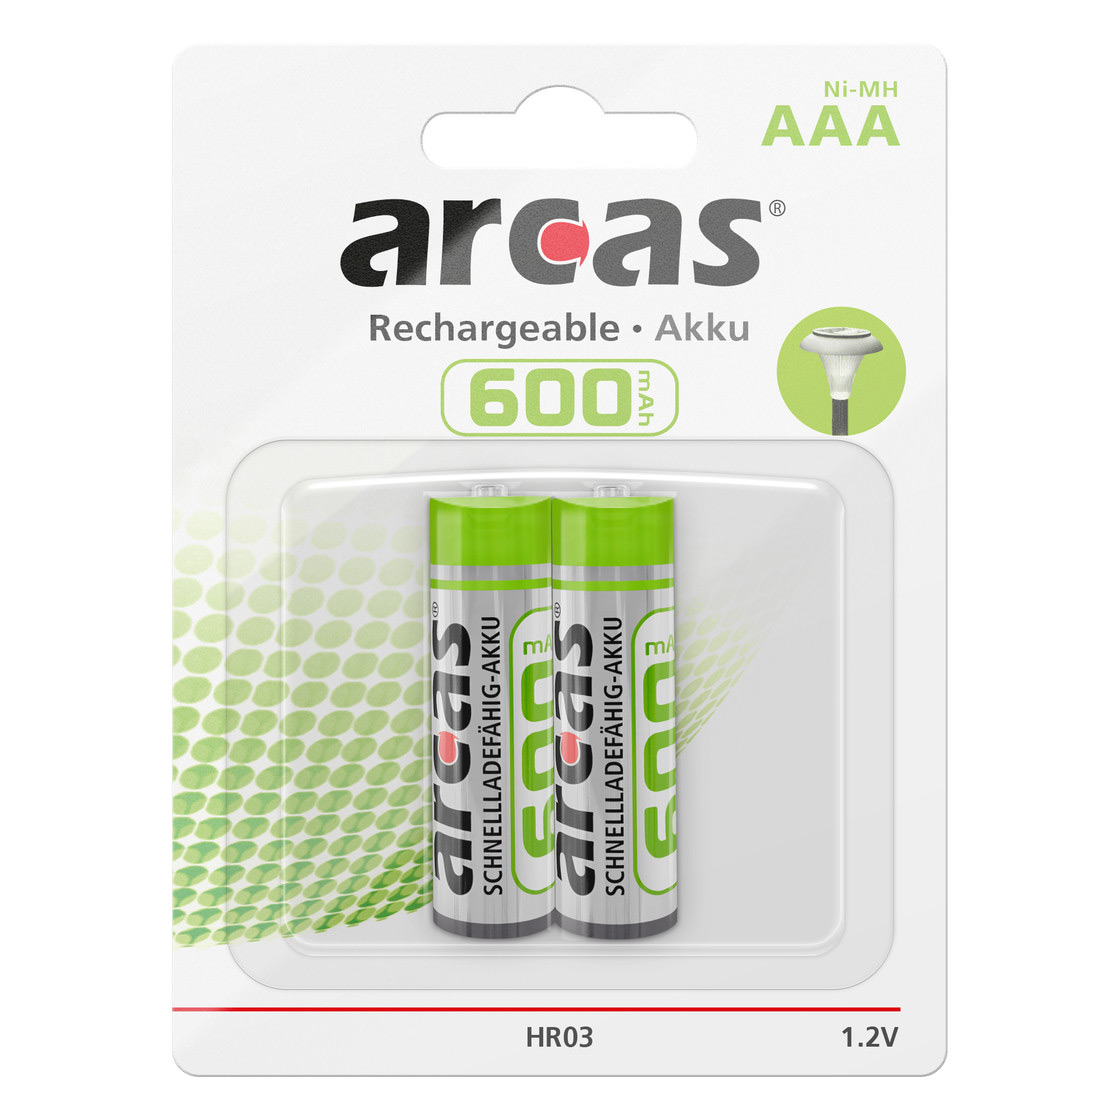 2 Piles rechargeable Duracell HR03 AAA - PILES/Piles Rechargeable